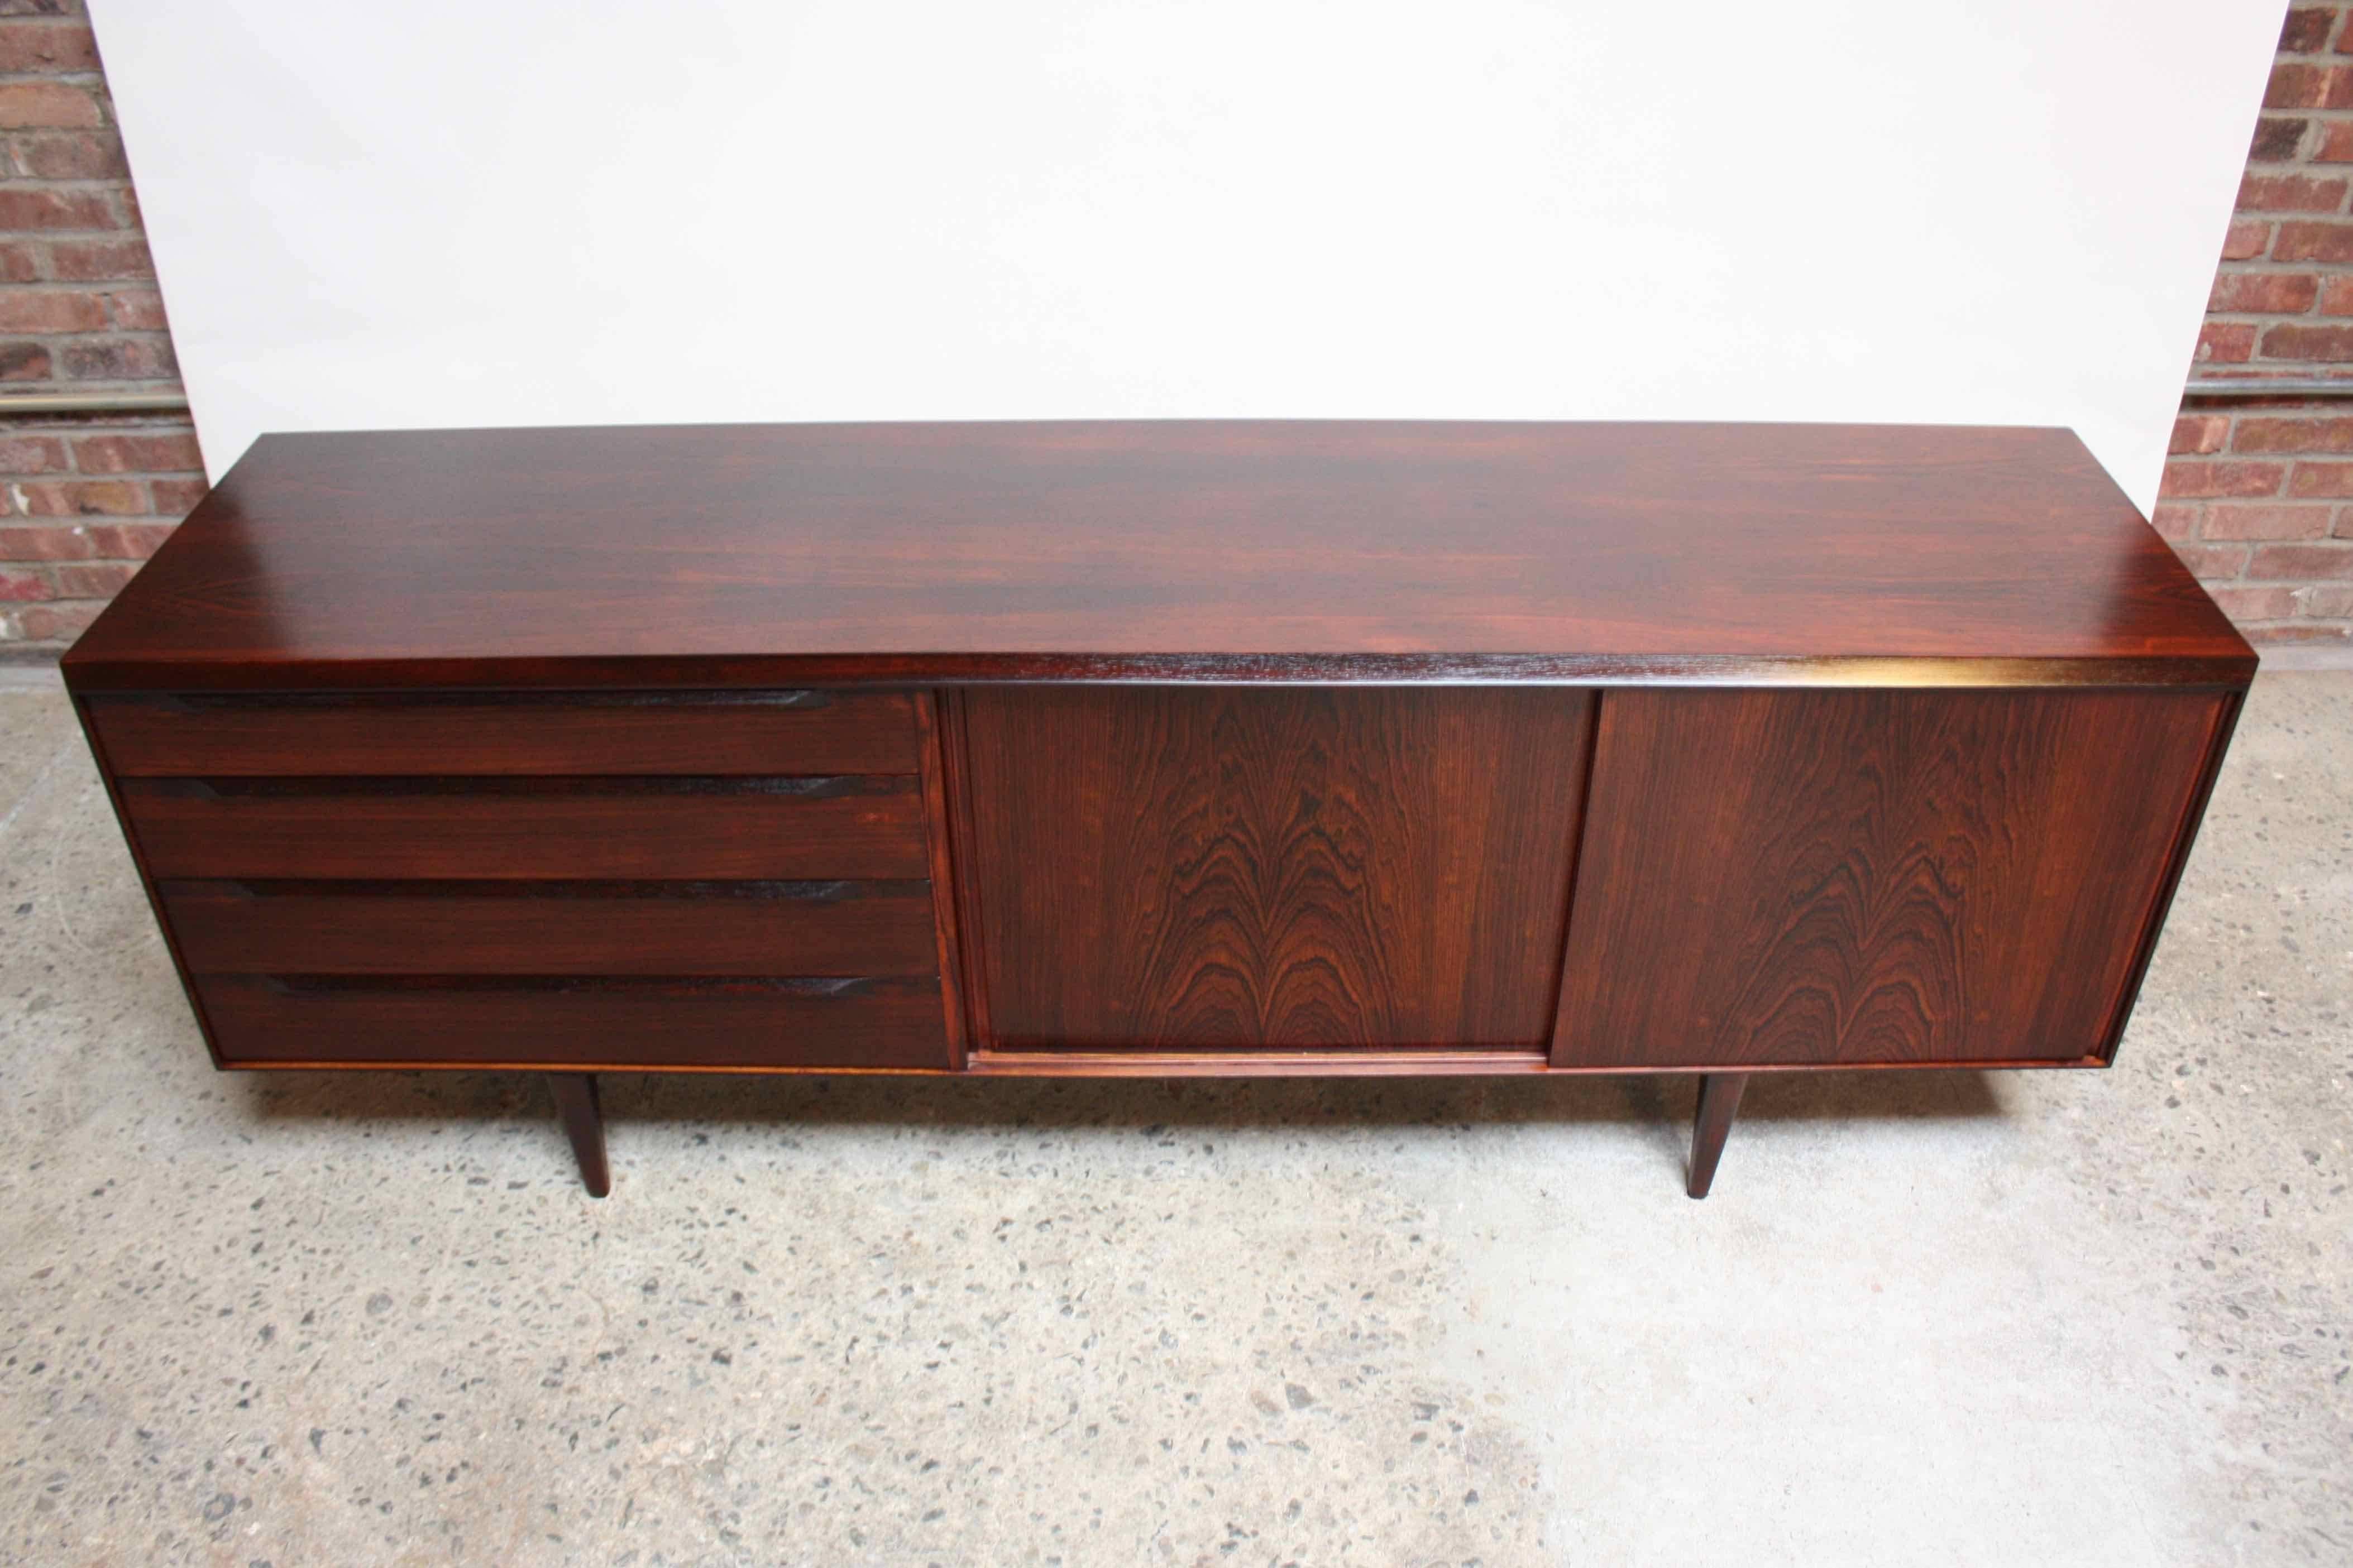 This exceptional low and sleek rosewood sideboard was designed by Kai Kristiansen in the 1960s. 
The bookmatched sliding doors open to reveal two adjustable shelves (one/side.) There are four drawers on the other side for additional storage.